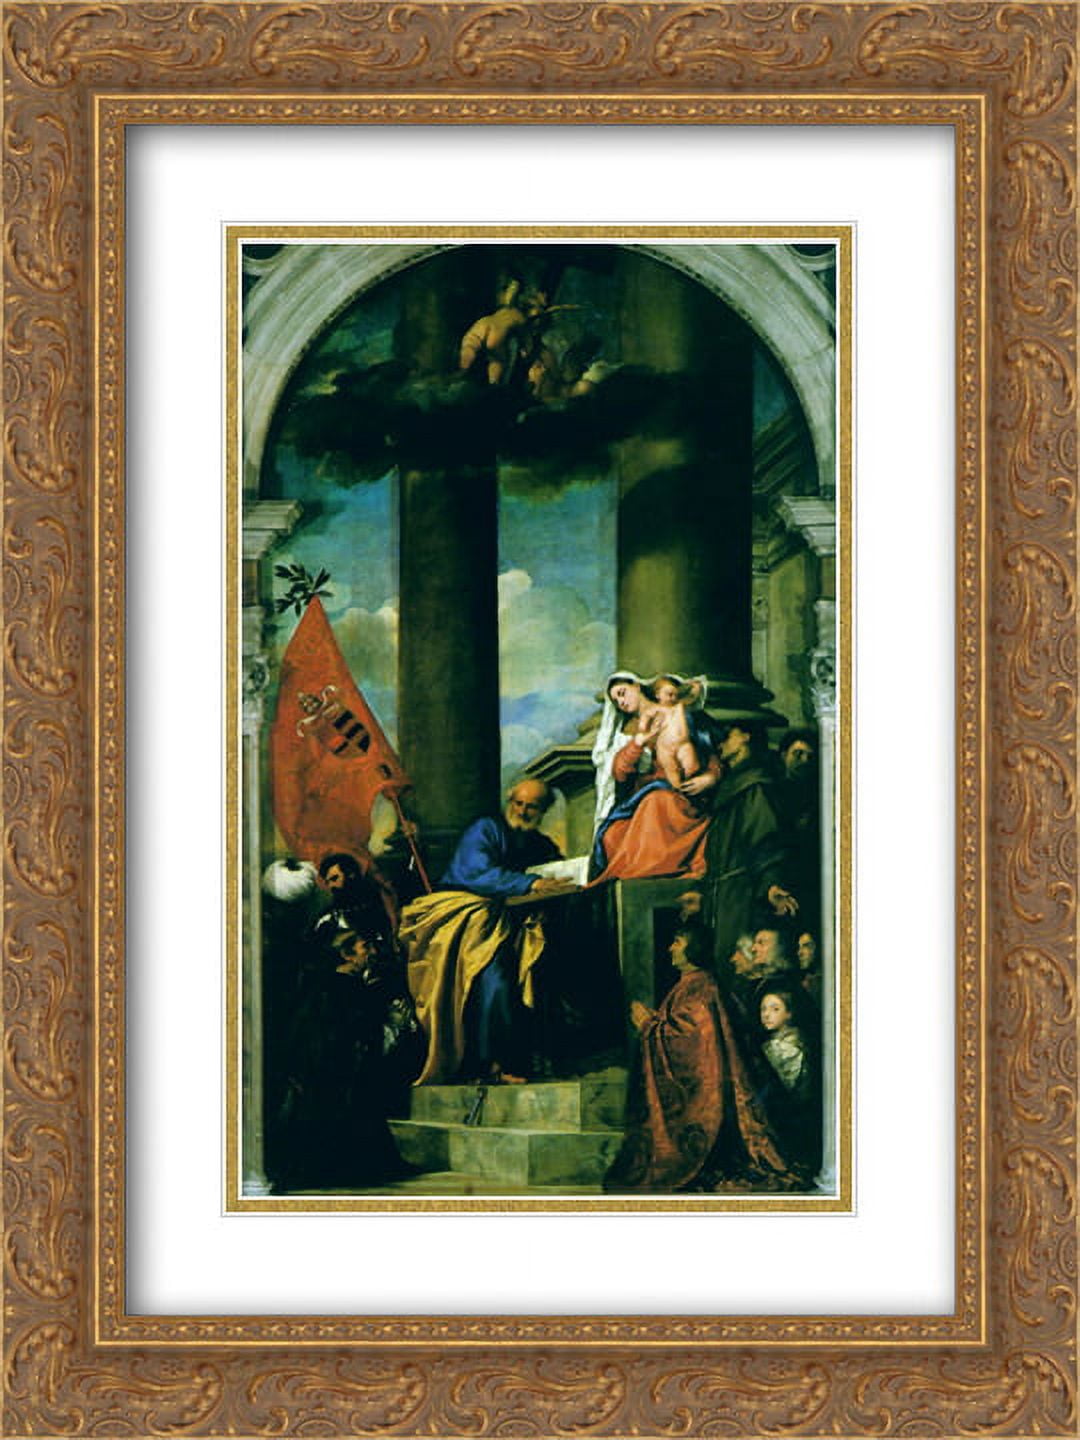 Titian 2x Matted 18x24 Gold Ornate Framed Art Print 'Madonna with ...